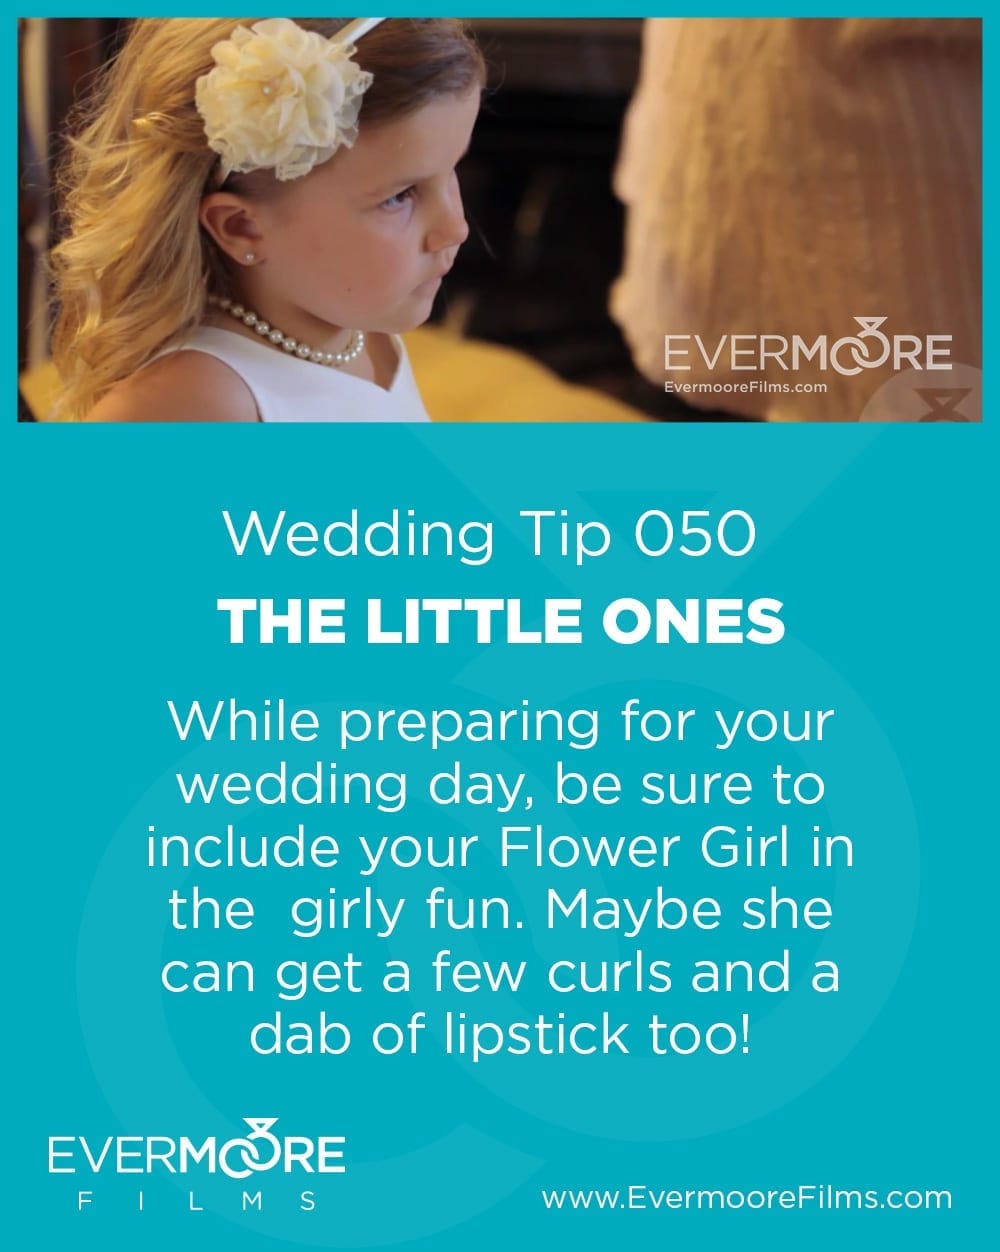 The Little Ones | Wedding Tip 050 | Evermoore Films | While preparing for your wedding day, be sure to include your Flower Girl in the girly fun. Maybe she can get a few curls and a dab of lipstick too!